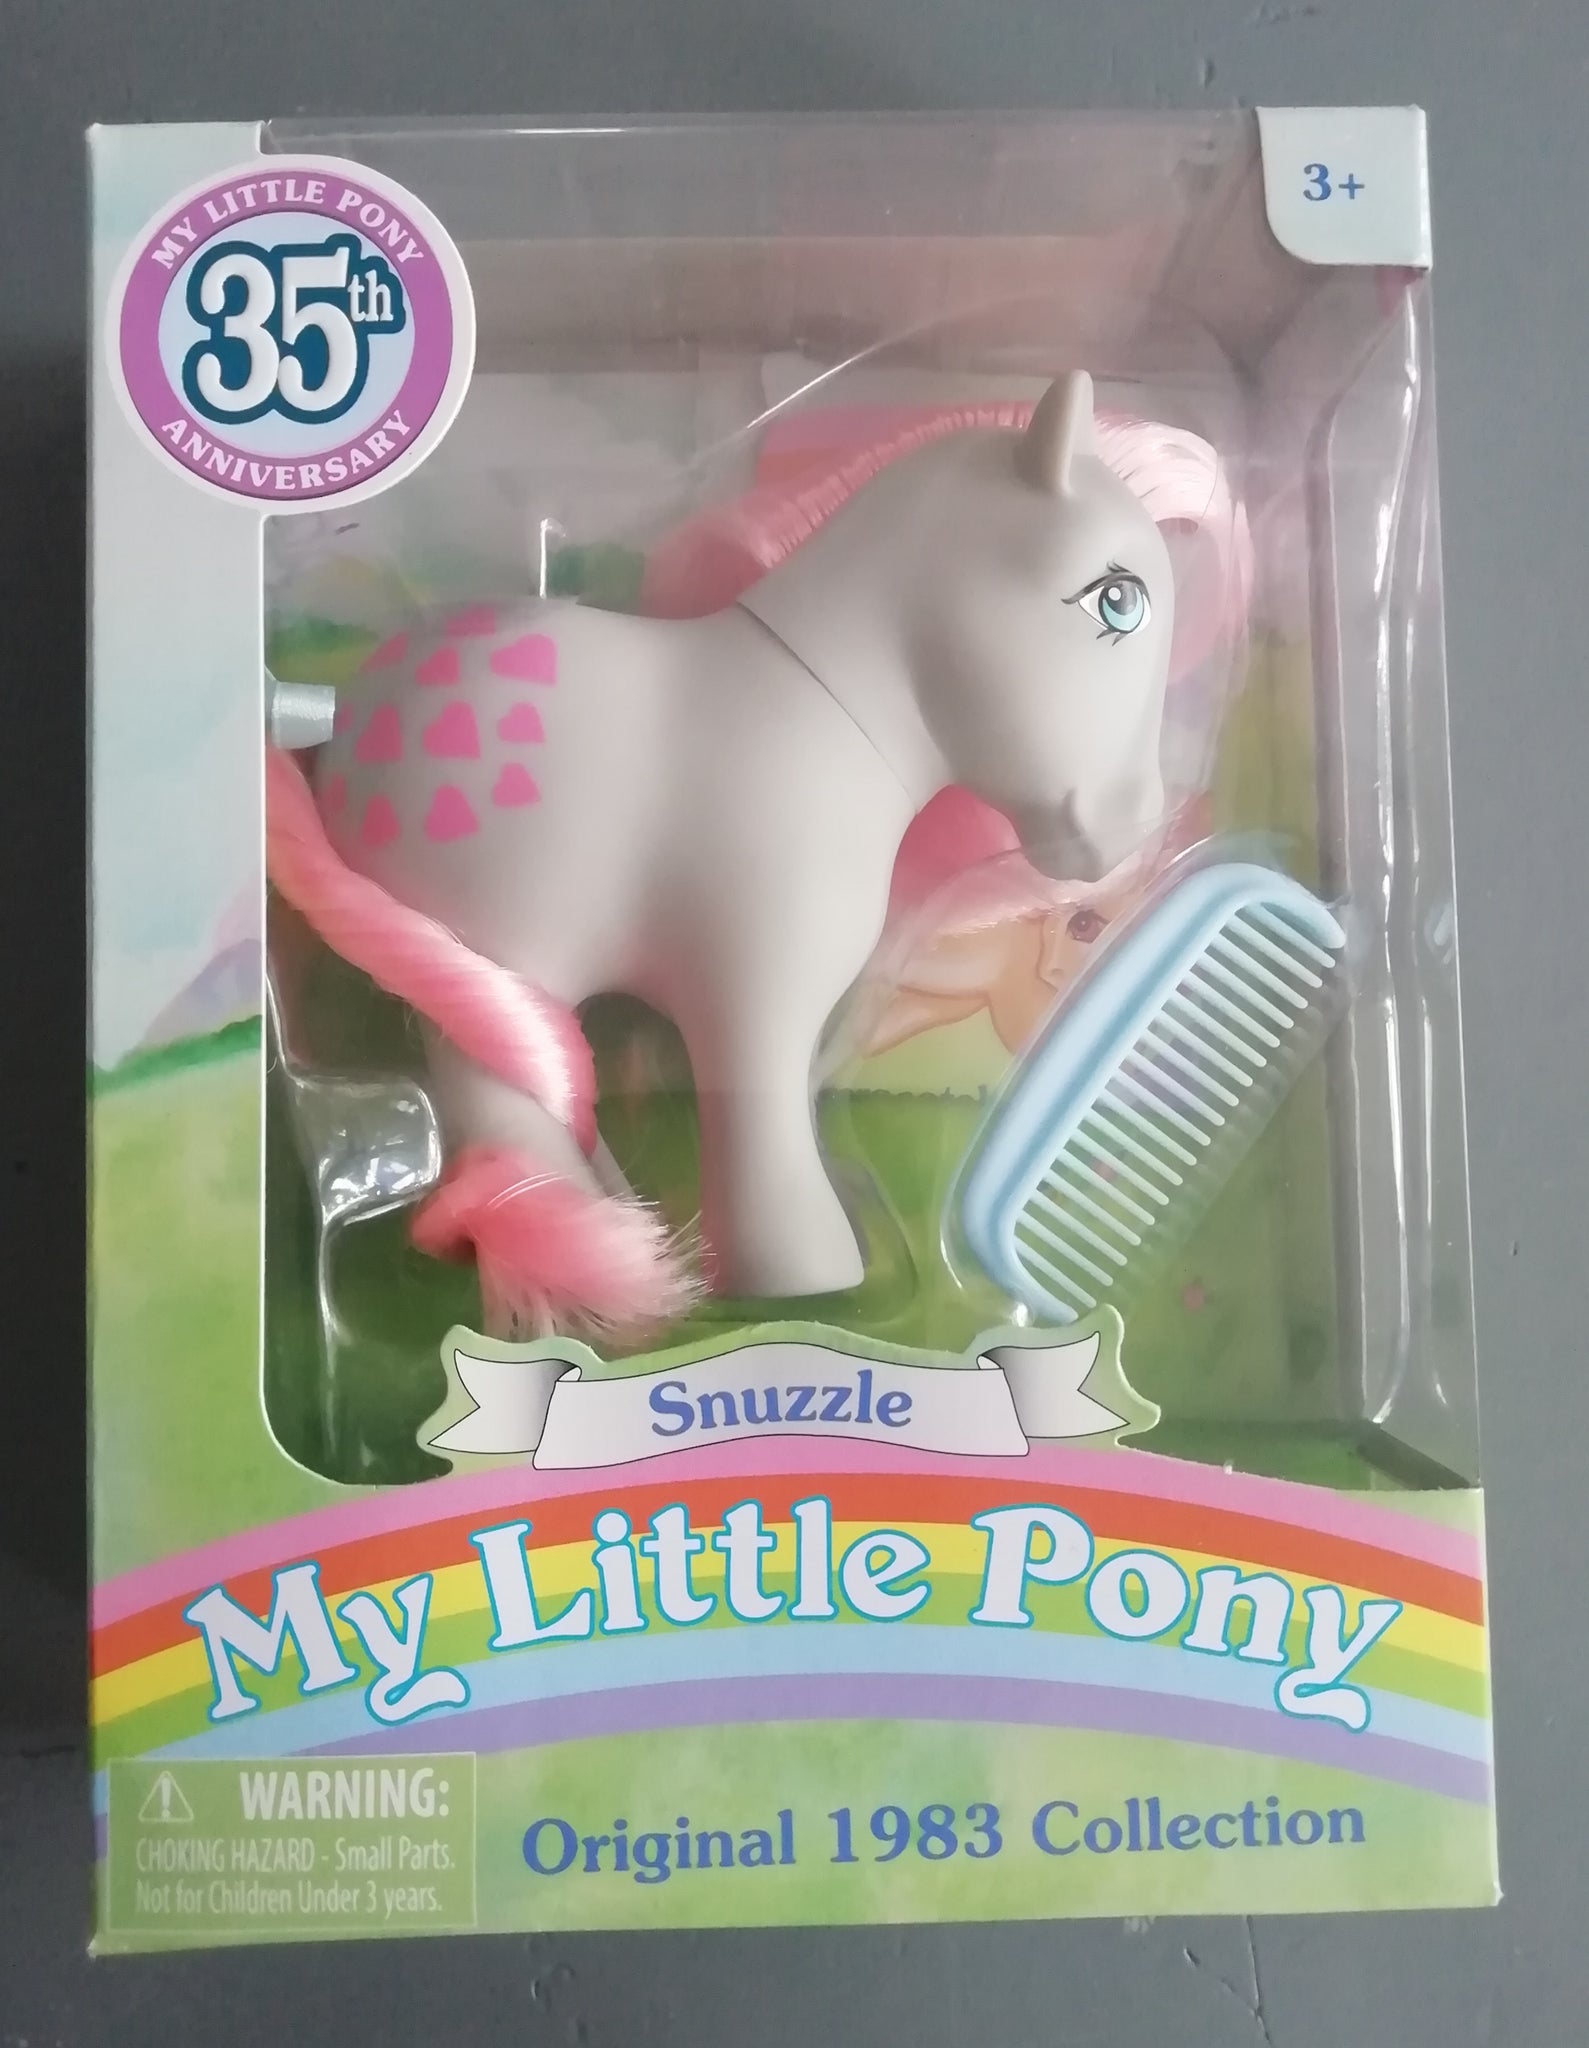 My Little Pony 35th Anniversary - Snuzzle